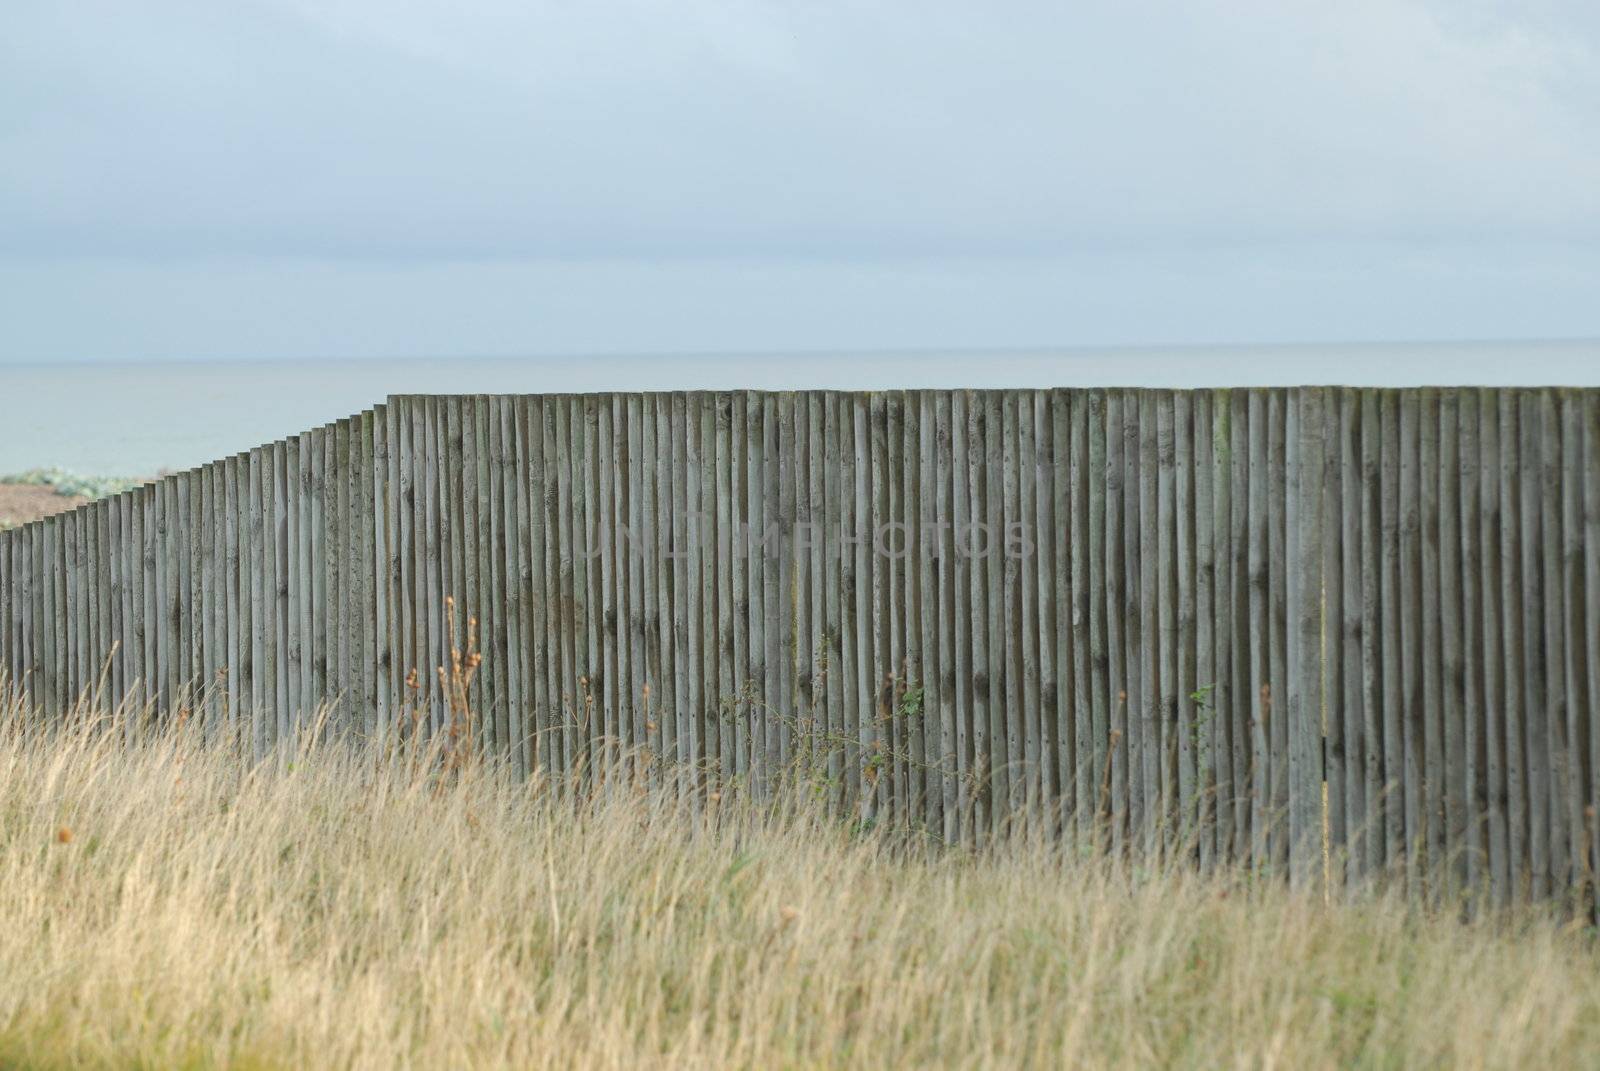 Fence by the seaside